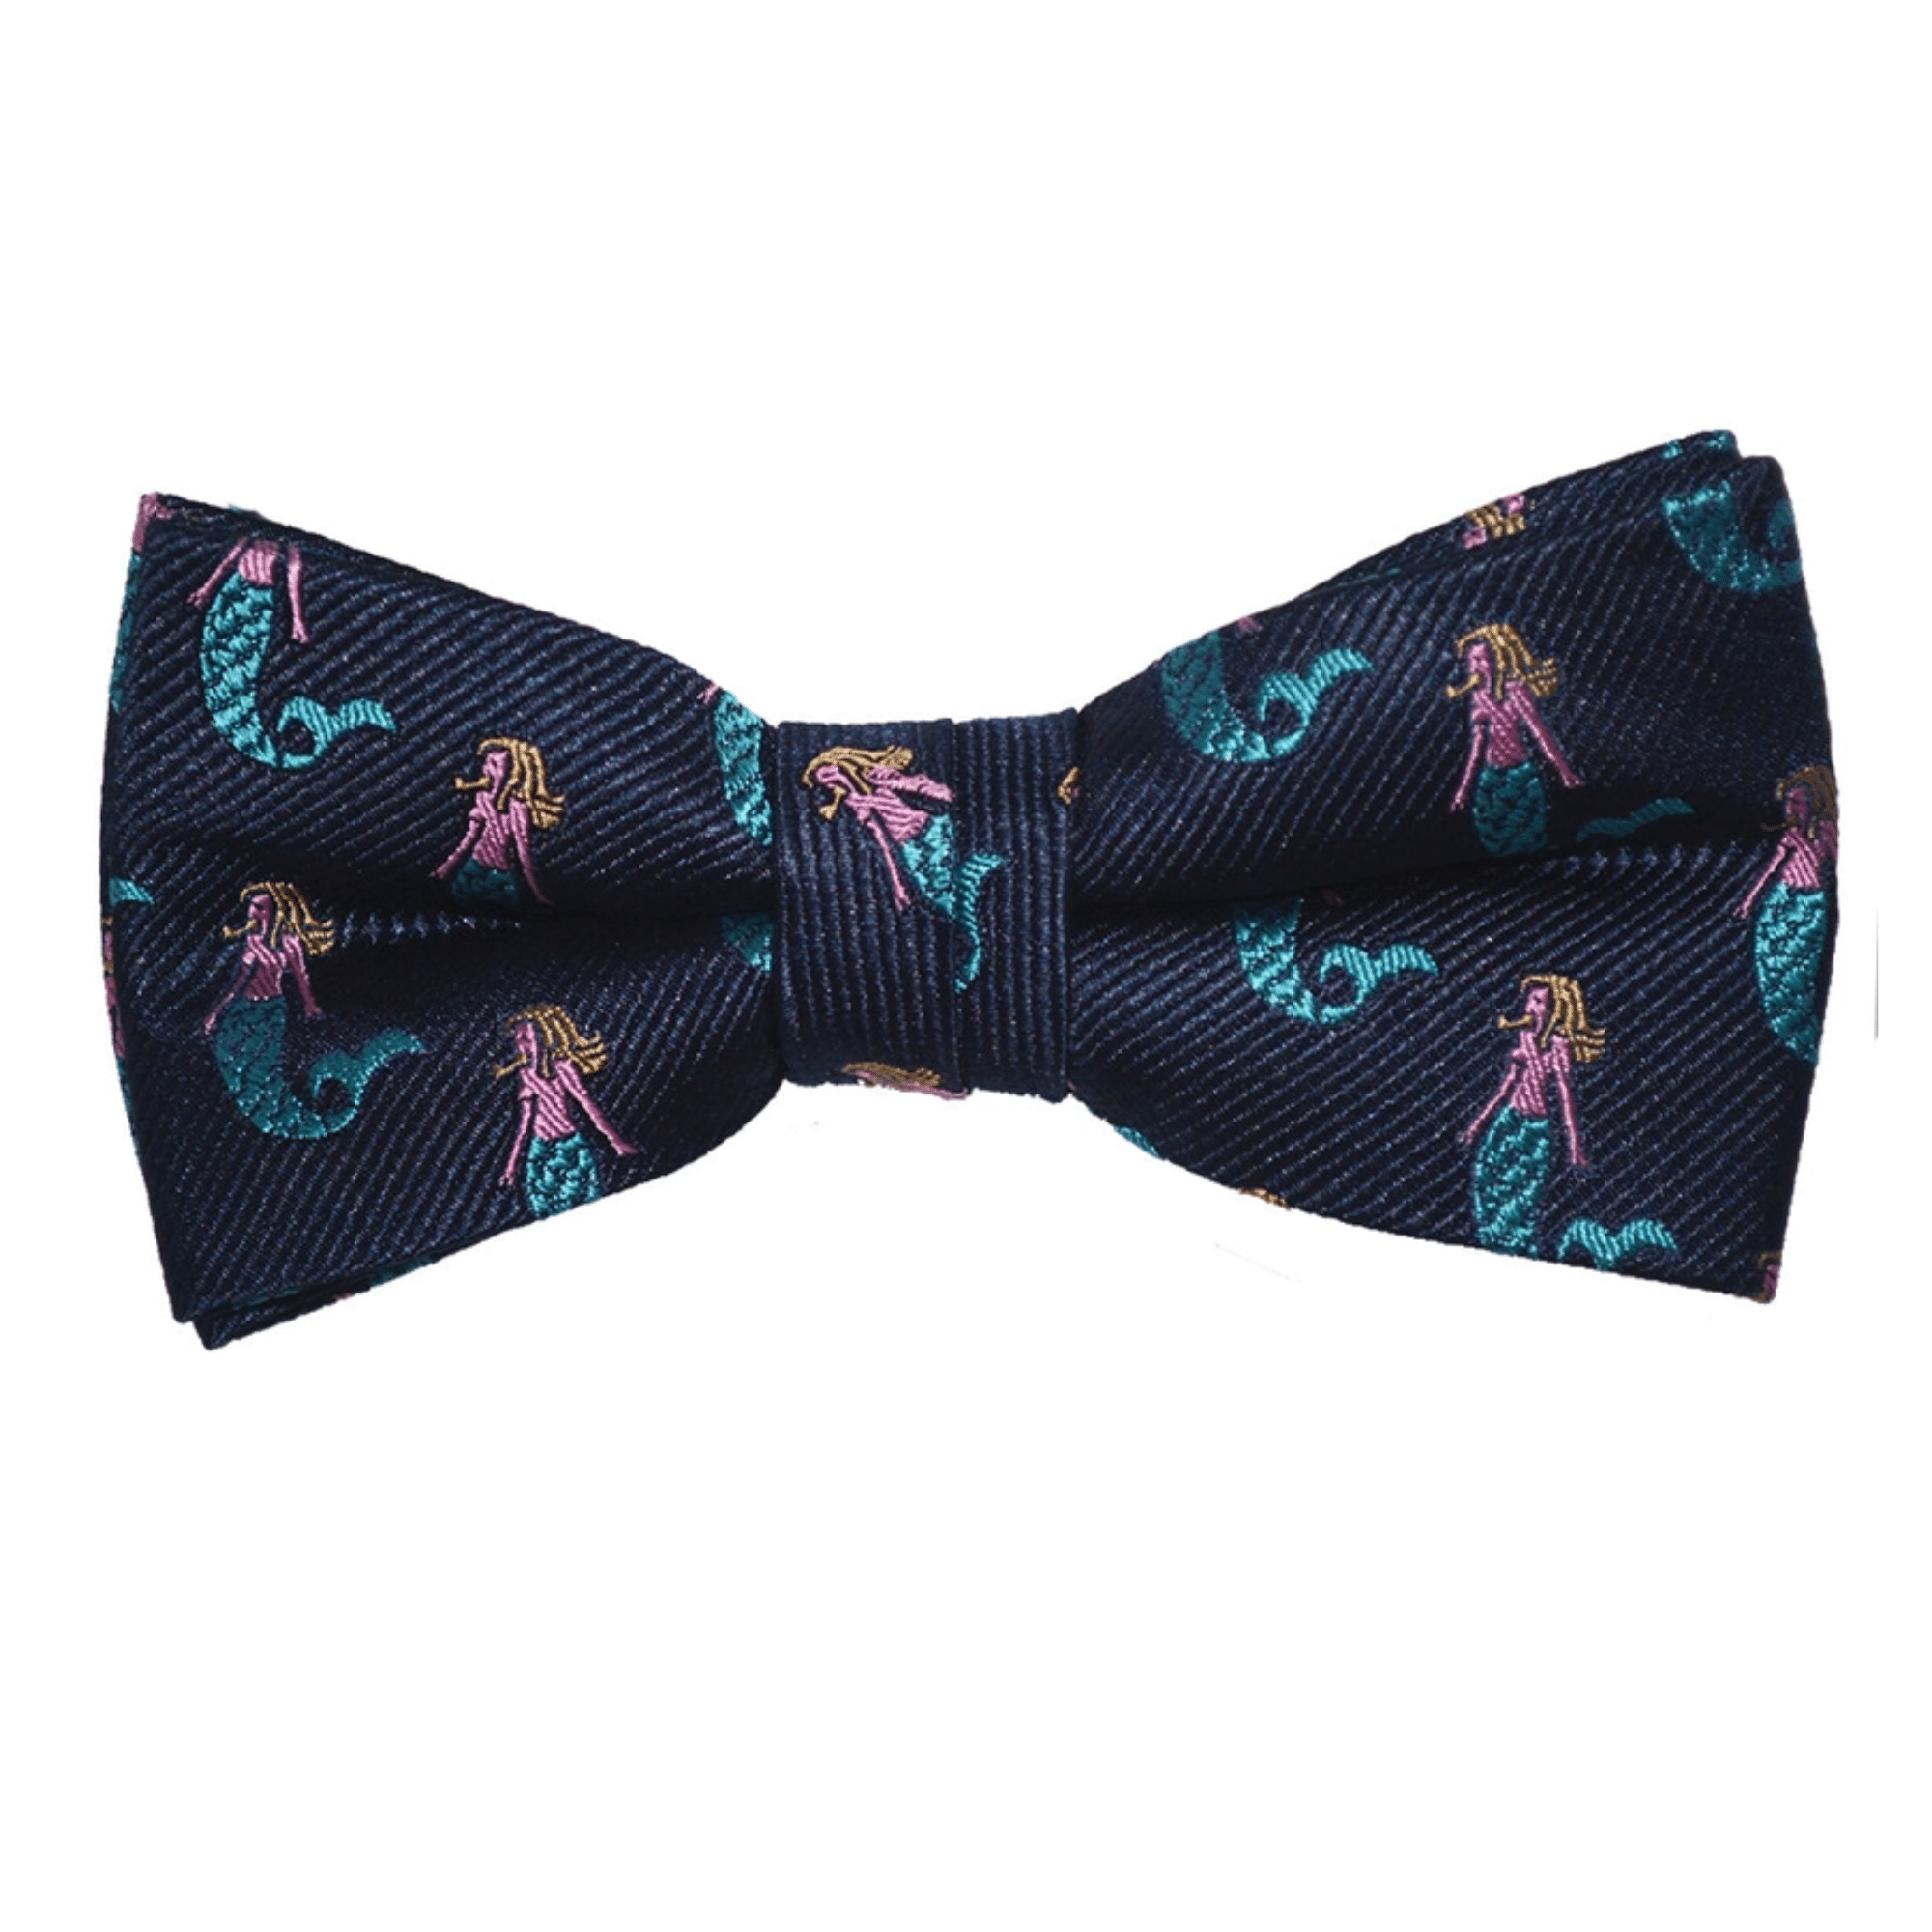 Mermaid Bow Tie - Navy, Woven Silk, Pre-Tied For Kids